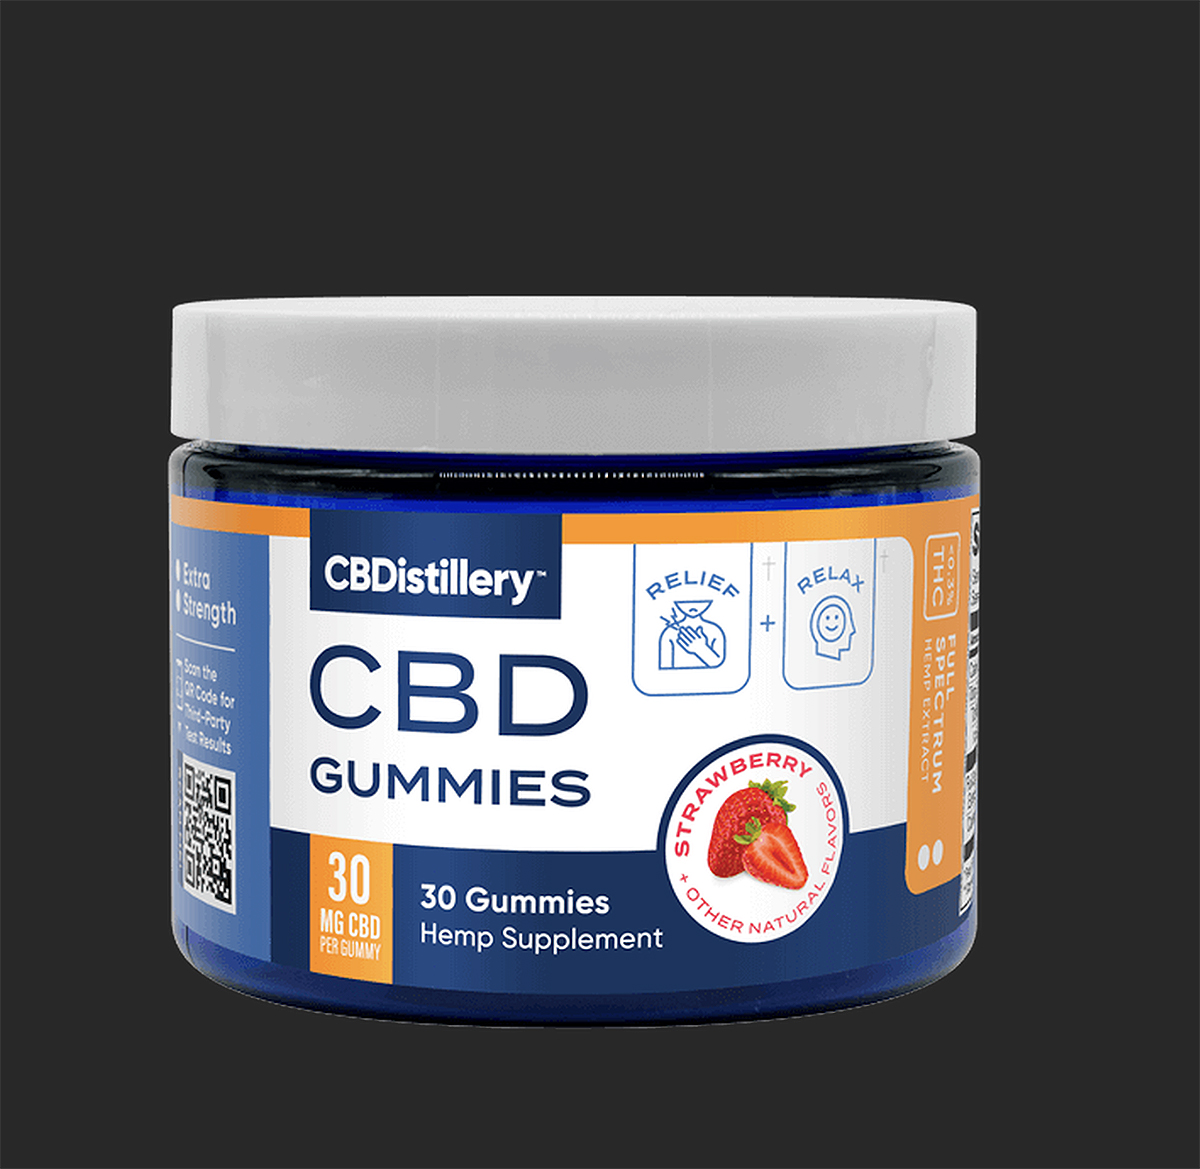 best recommended CBD gummies